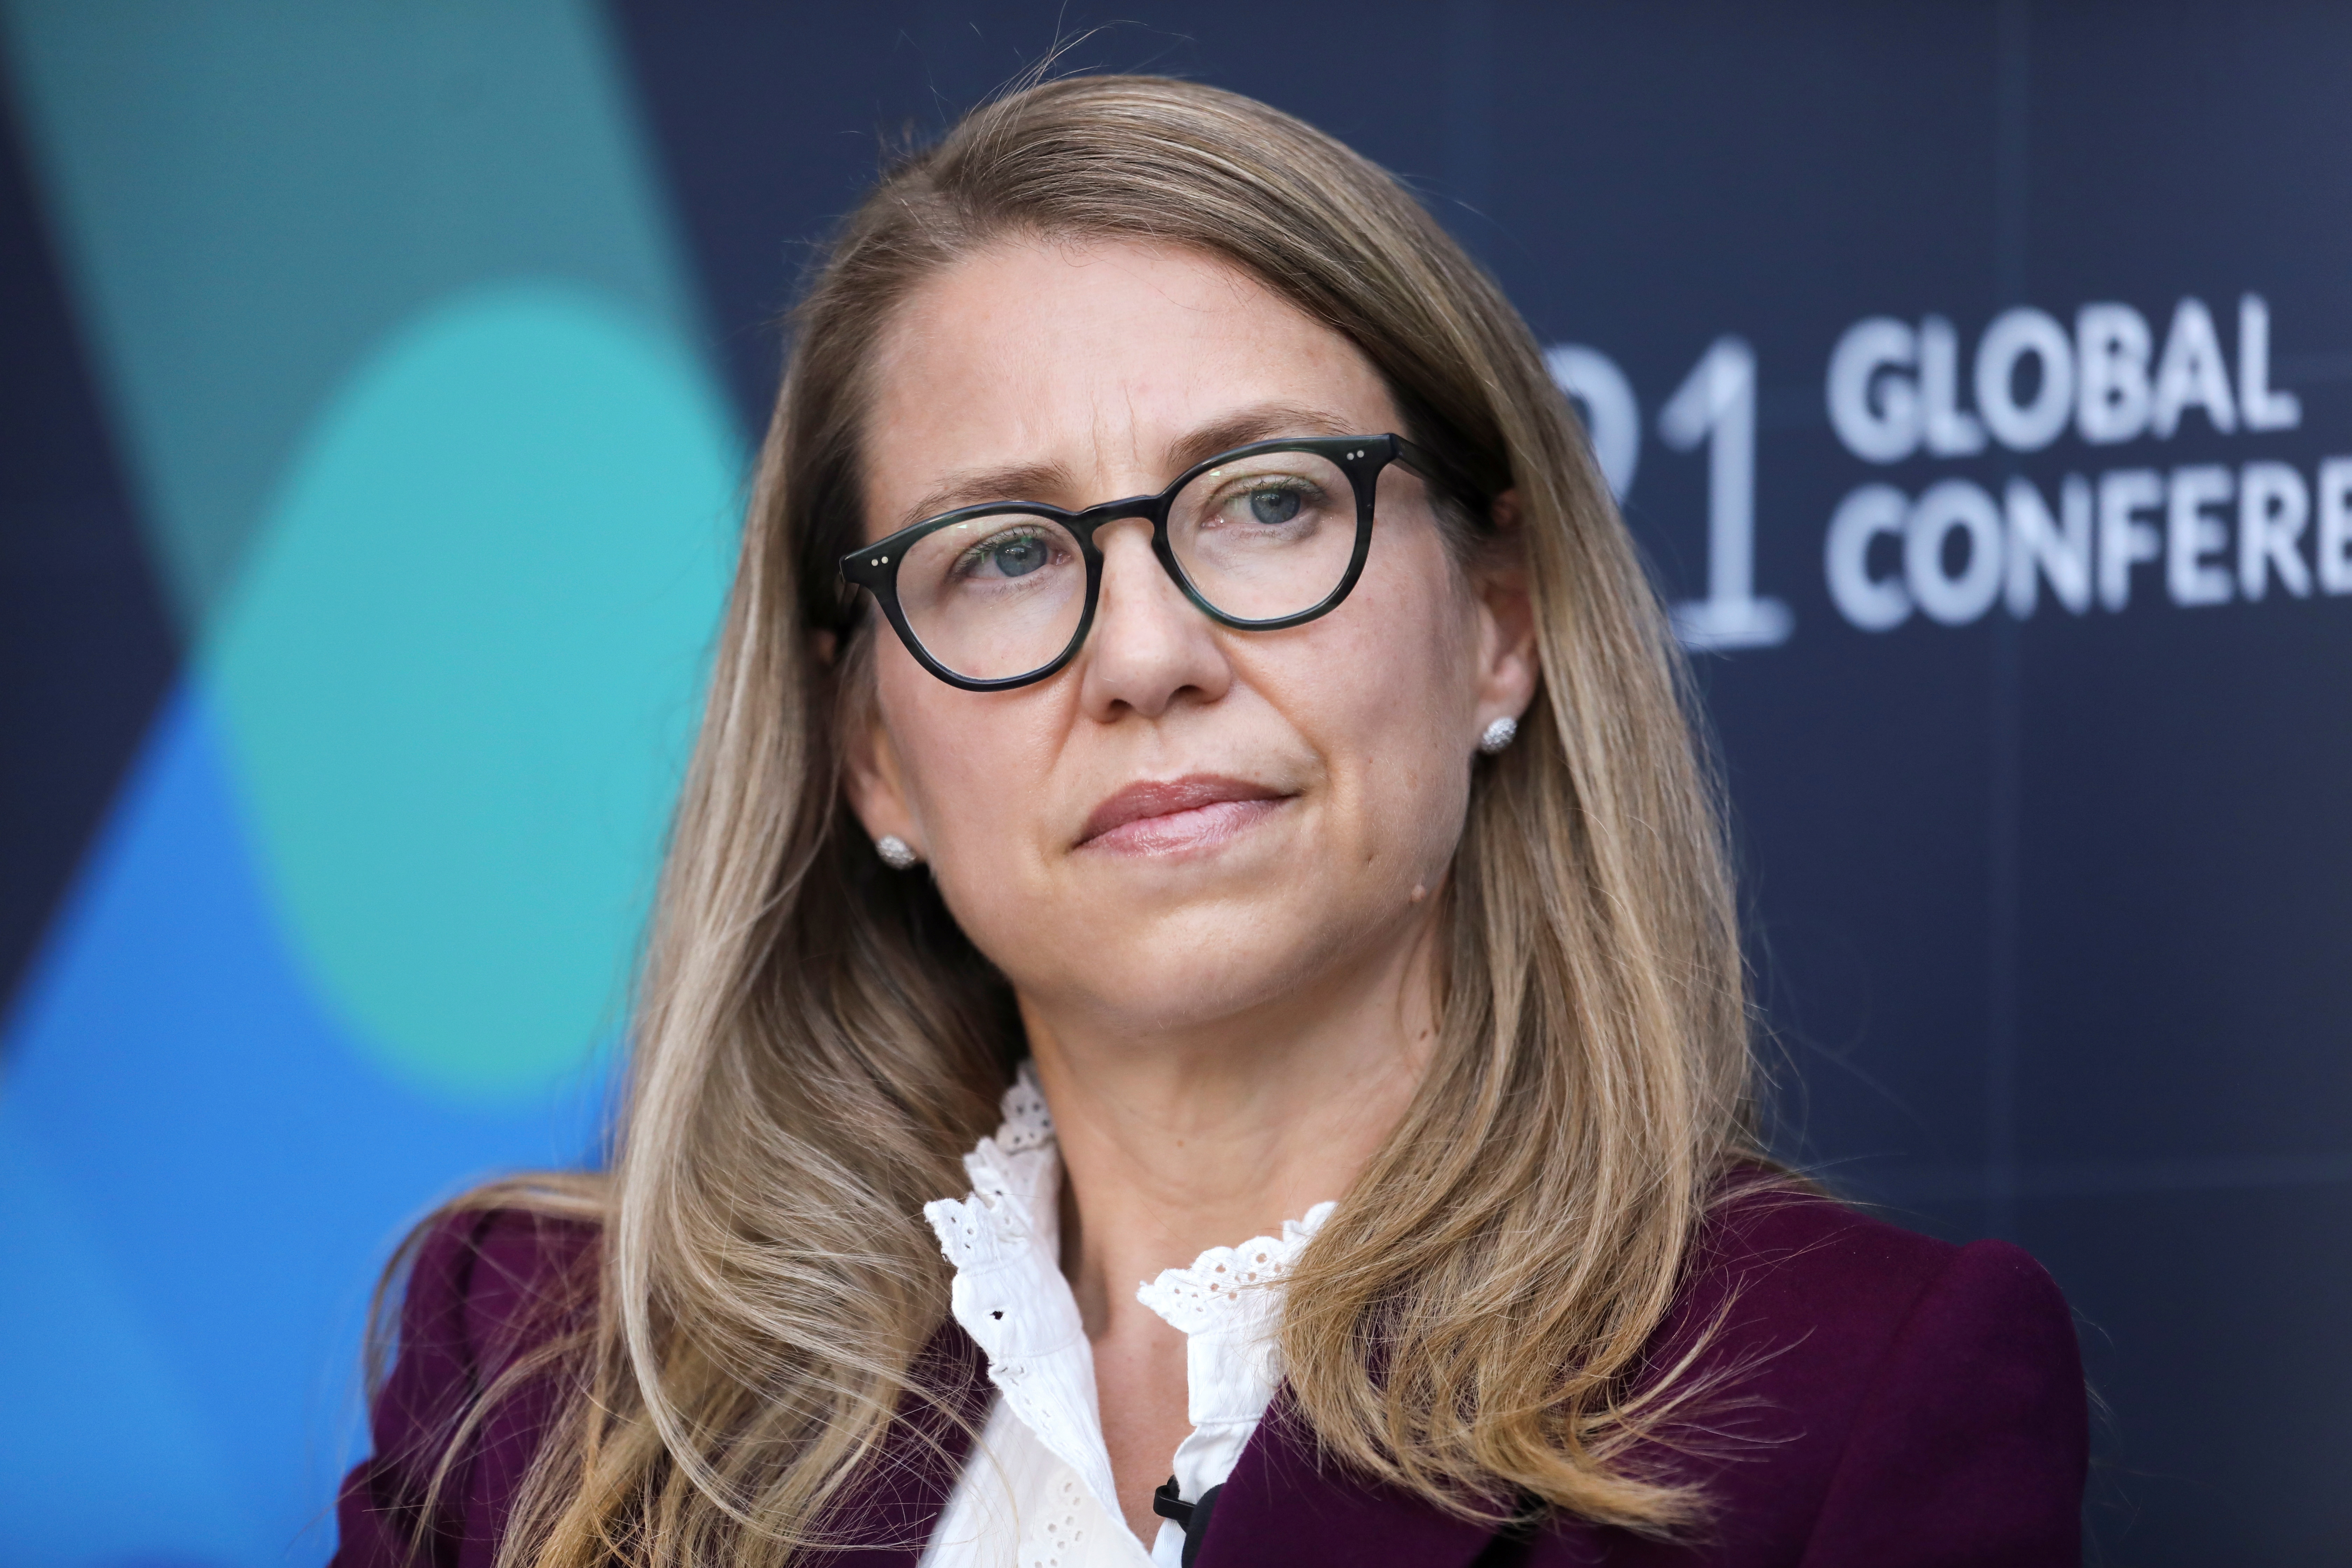 Coinbase Chief Financial Officer Alesia Haas looks on during the 2021 Milken Institute Global Conference in Beverly Hills, California, U.S., October 18, 2021. REUTERS/David Swanson